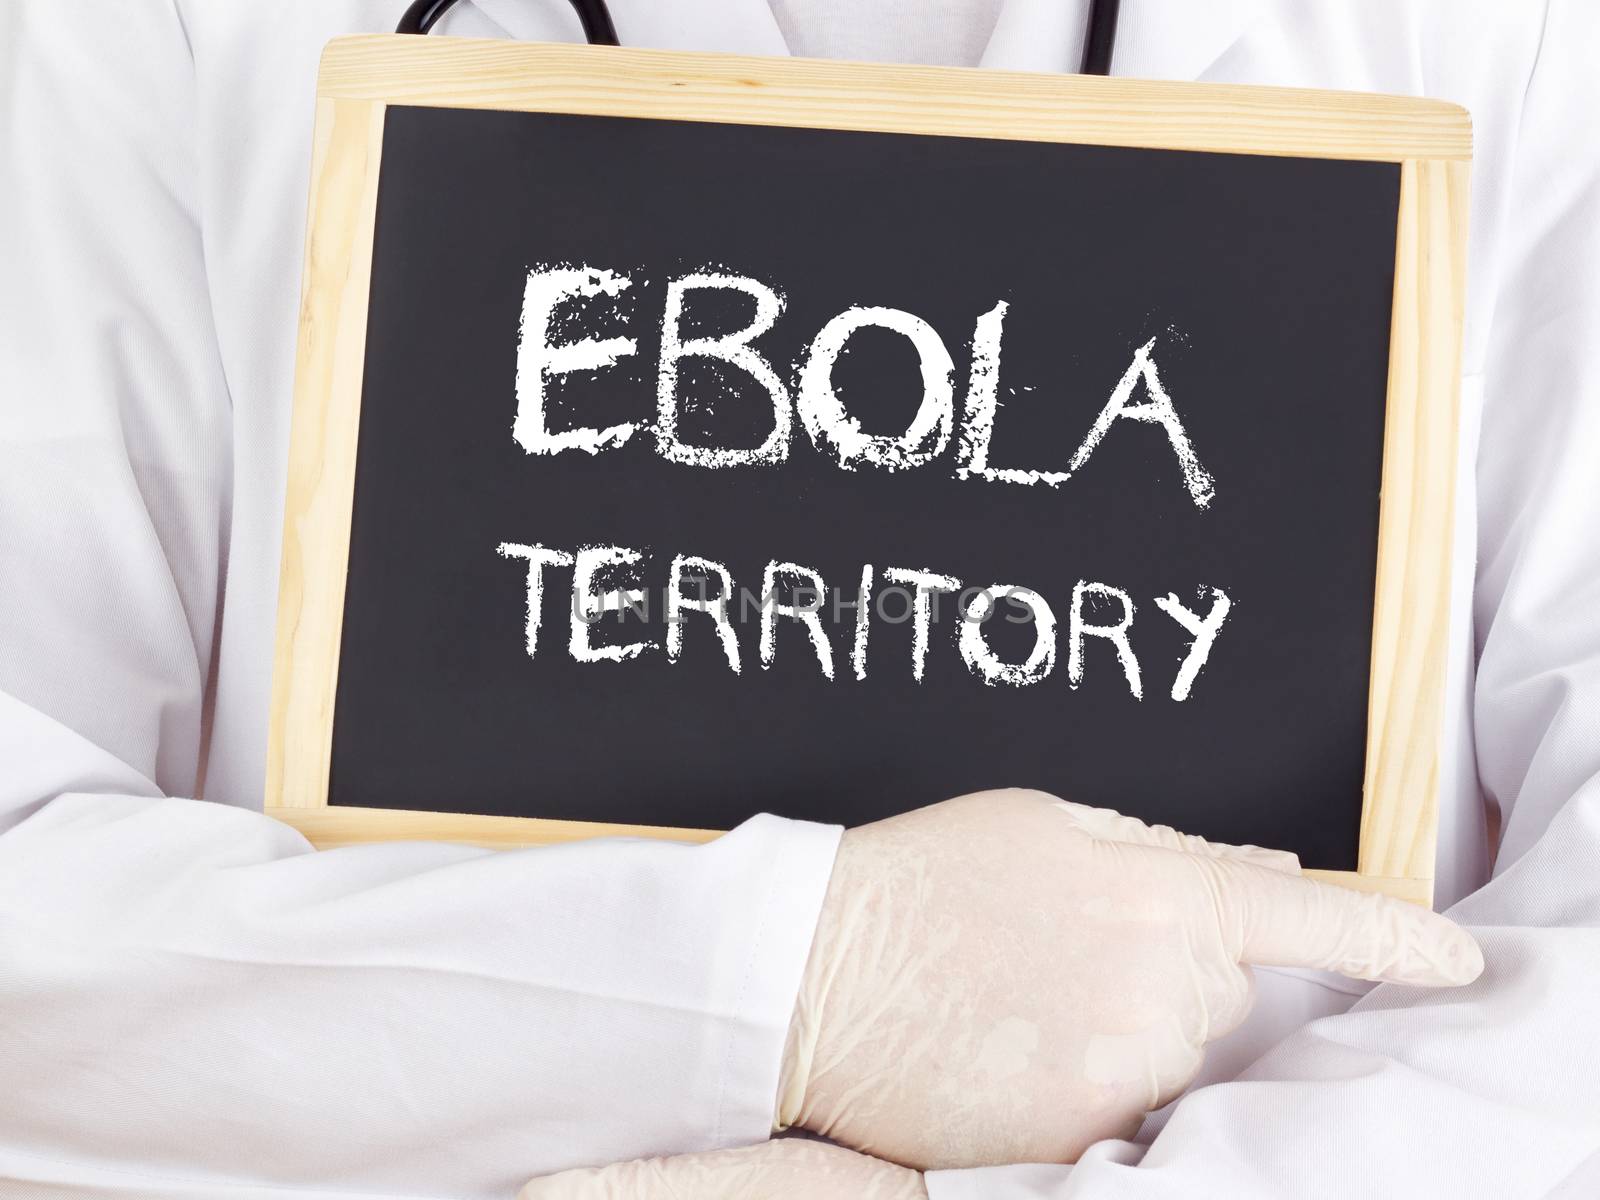 Doctor shows information: Ebola territory